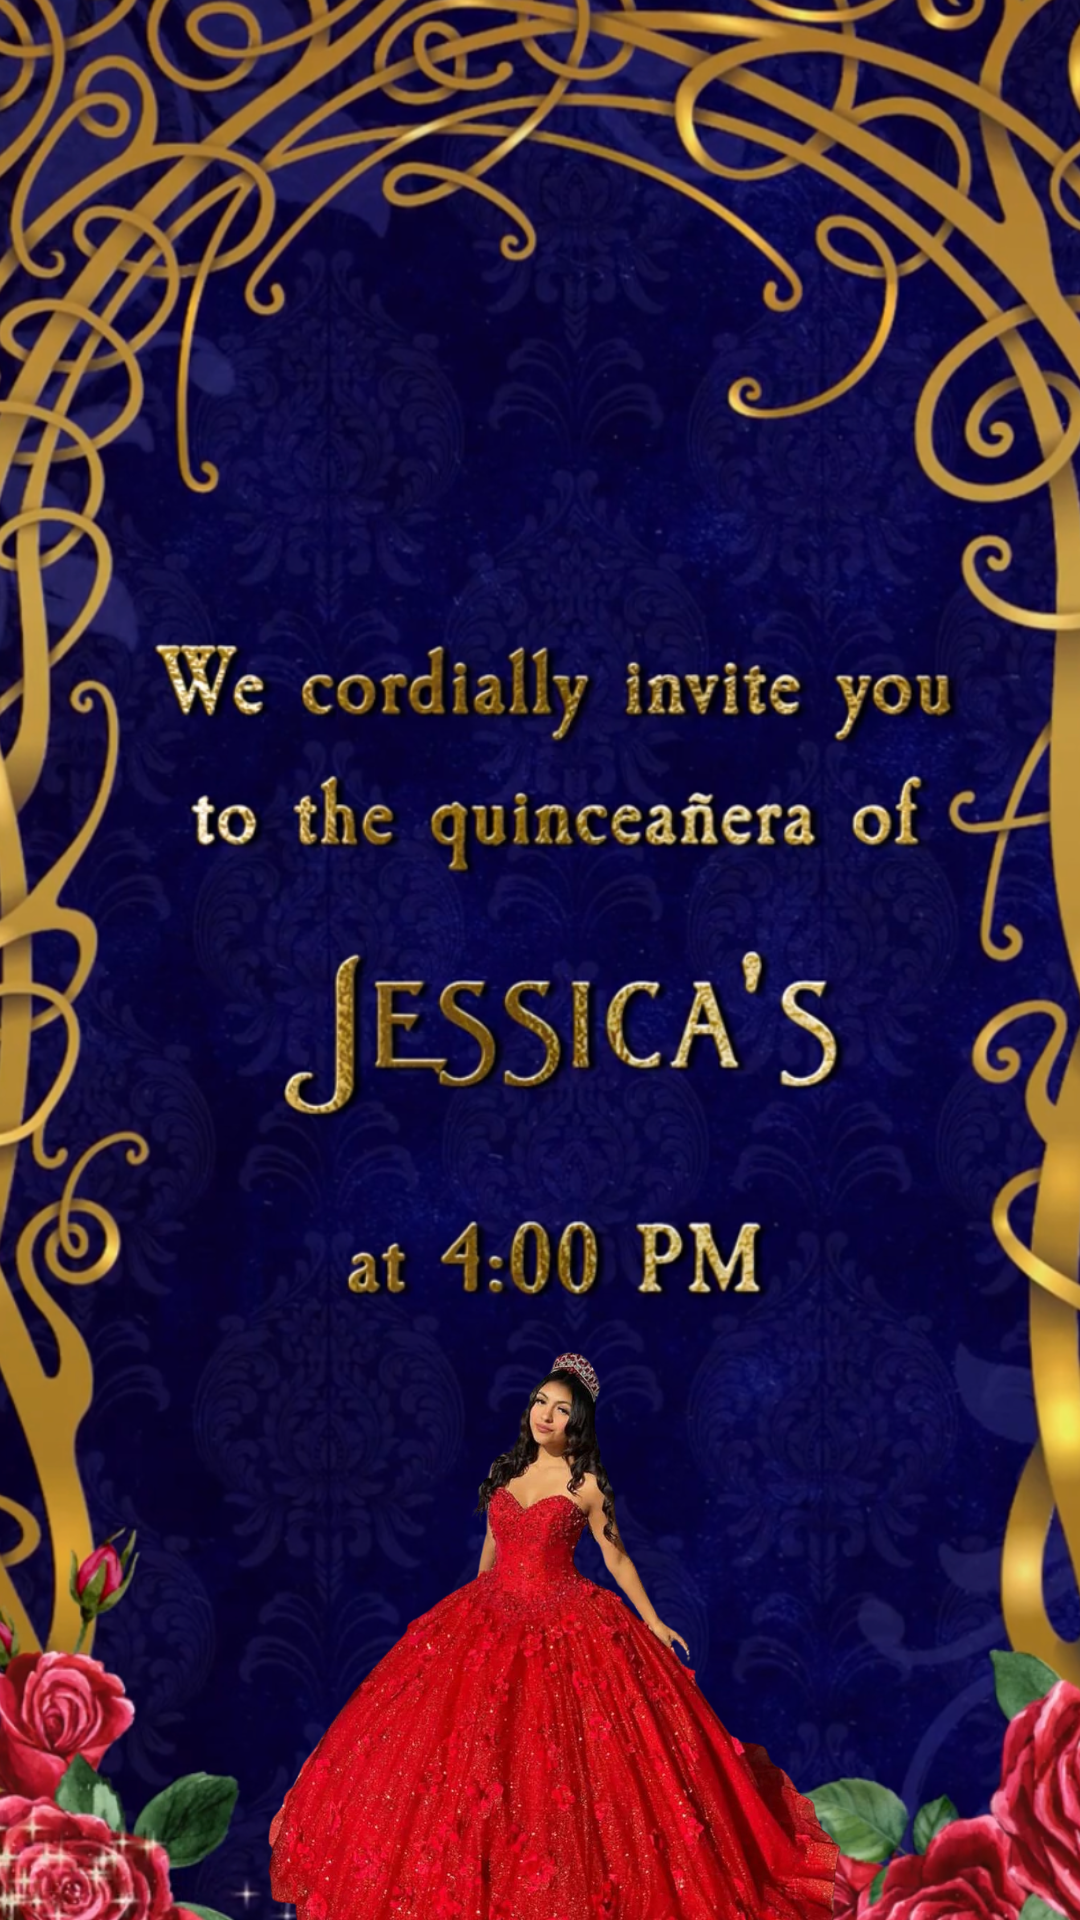 Beauty and the Beast Quinceañera Video Invitations - Red Dress Theme Sweet 15 Enchanted Rose Quince Años Invite